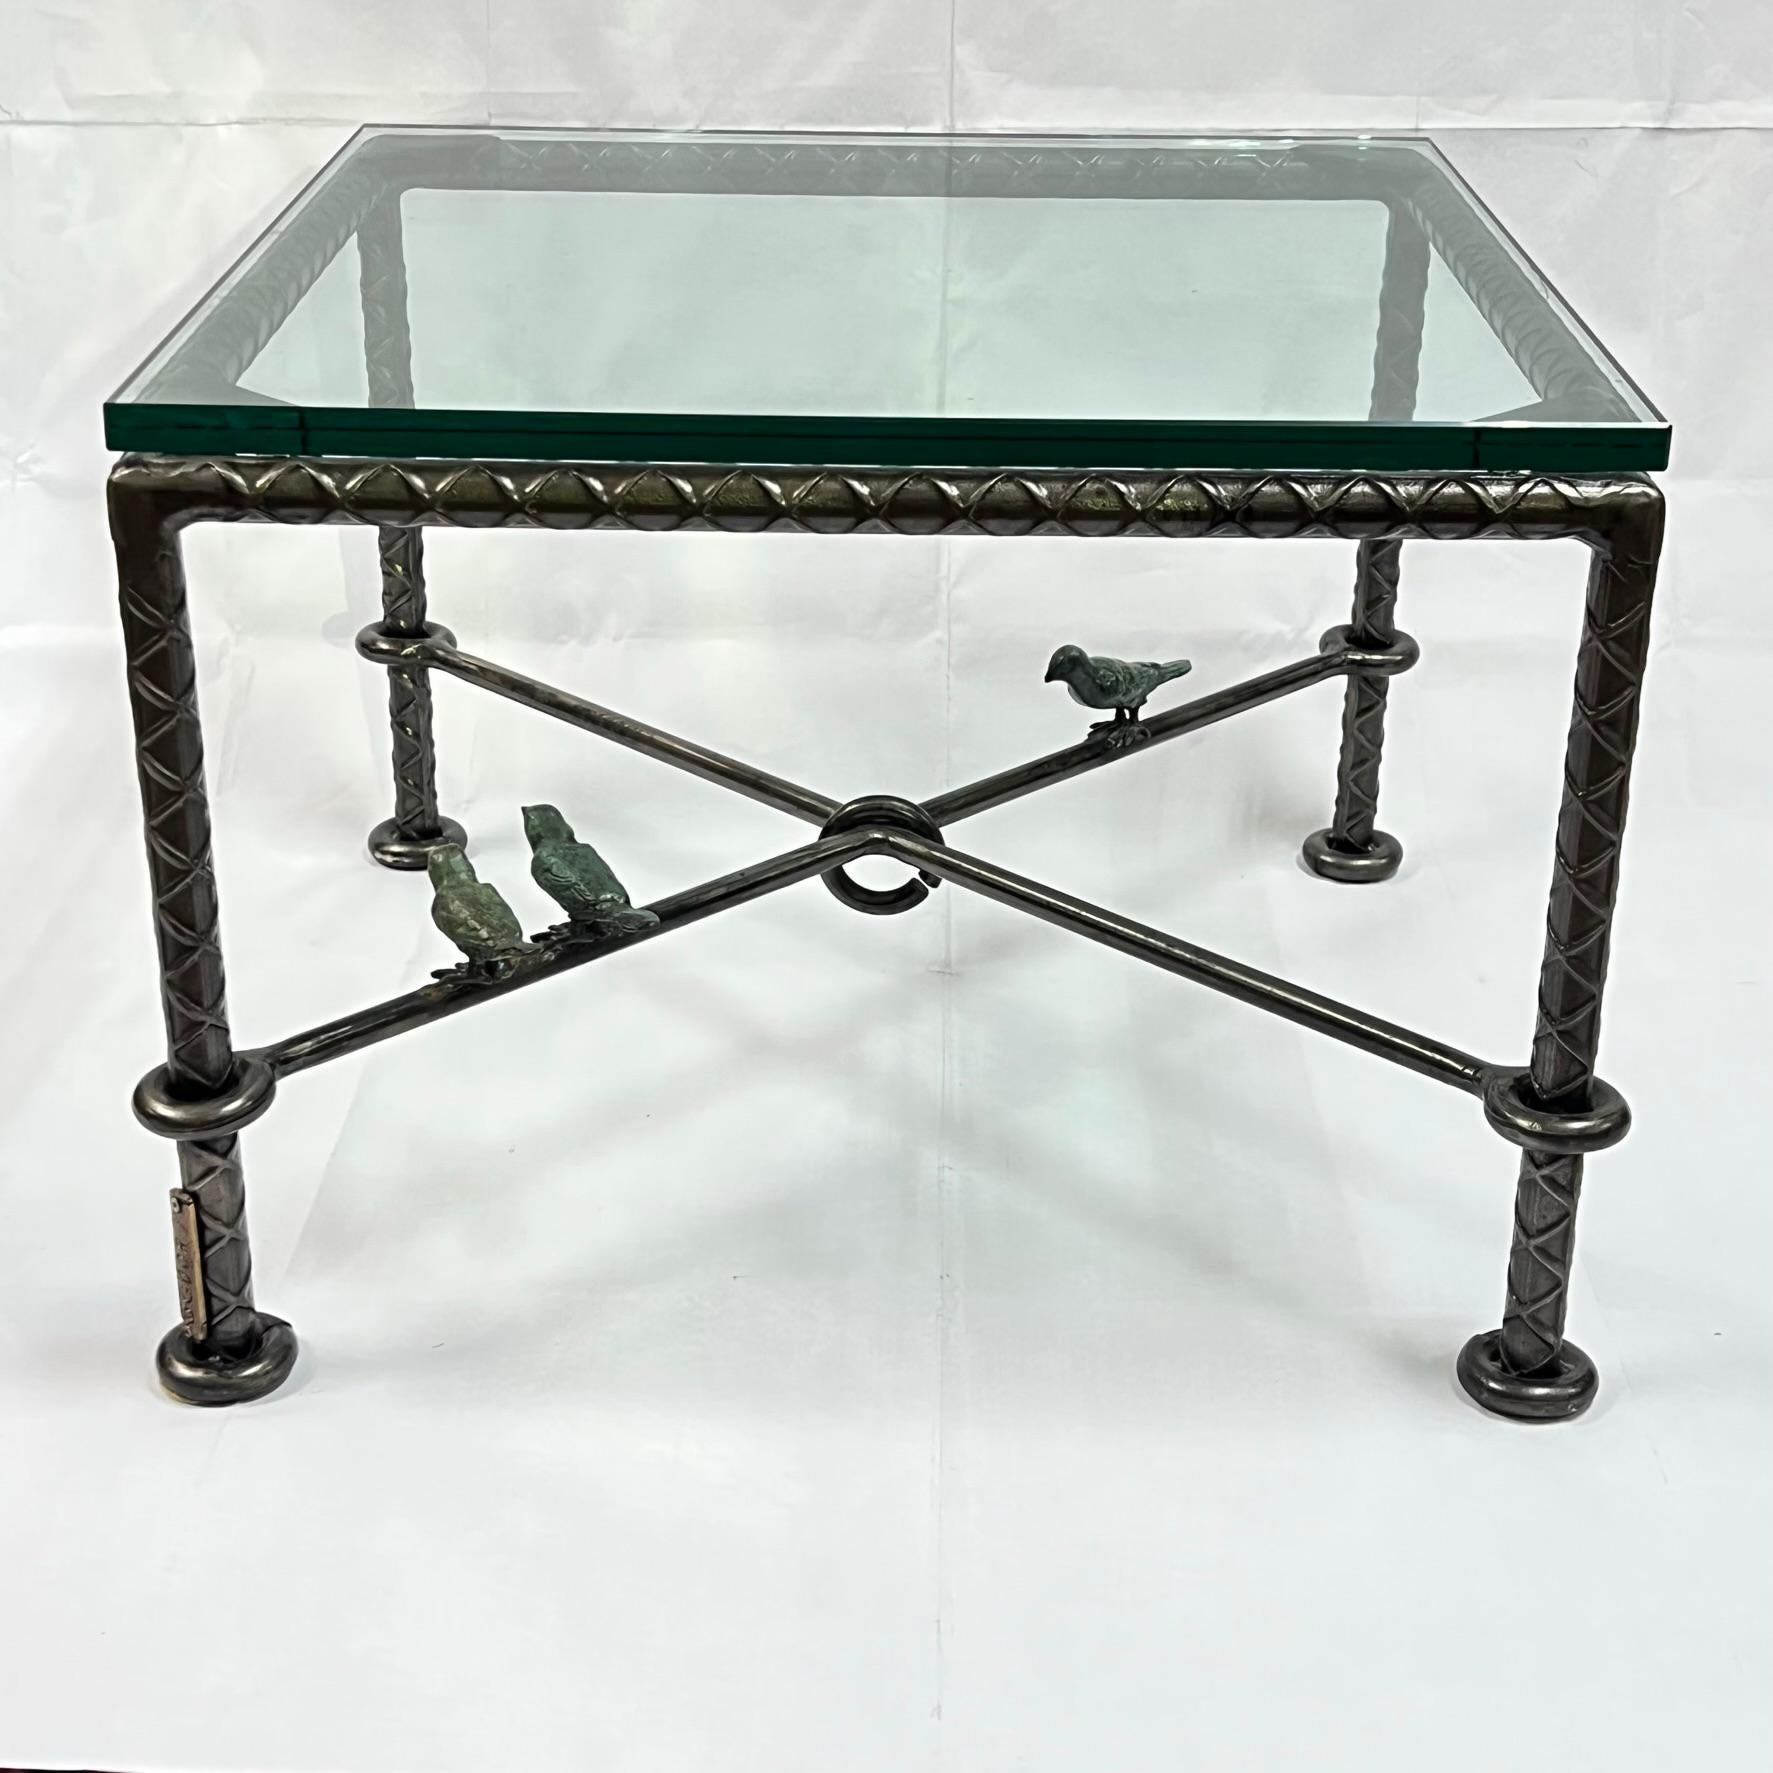 Pair steel and glass cocktail tables by Ilana Goor, circa 1985.